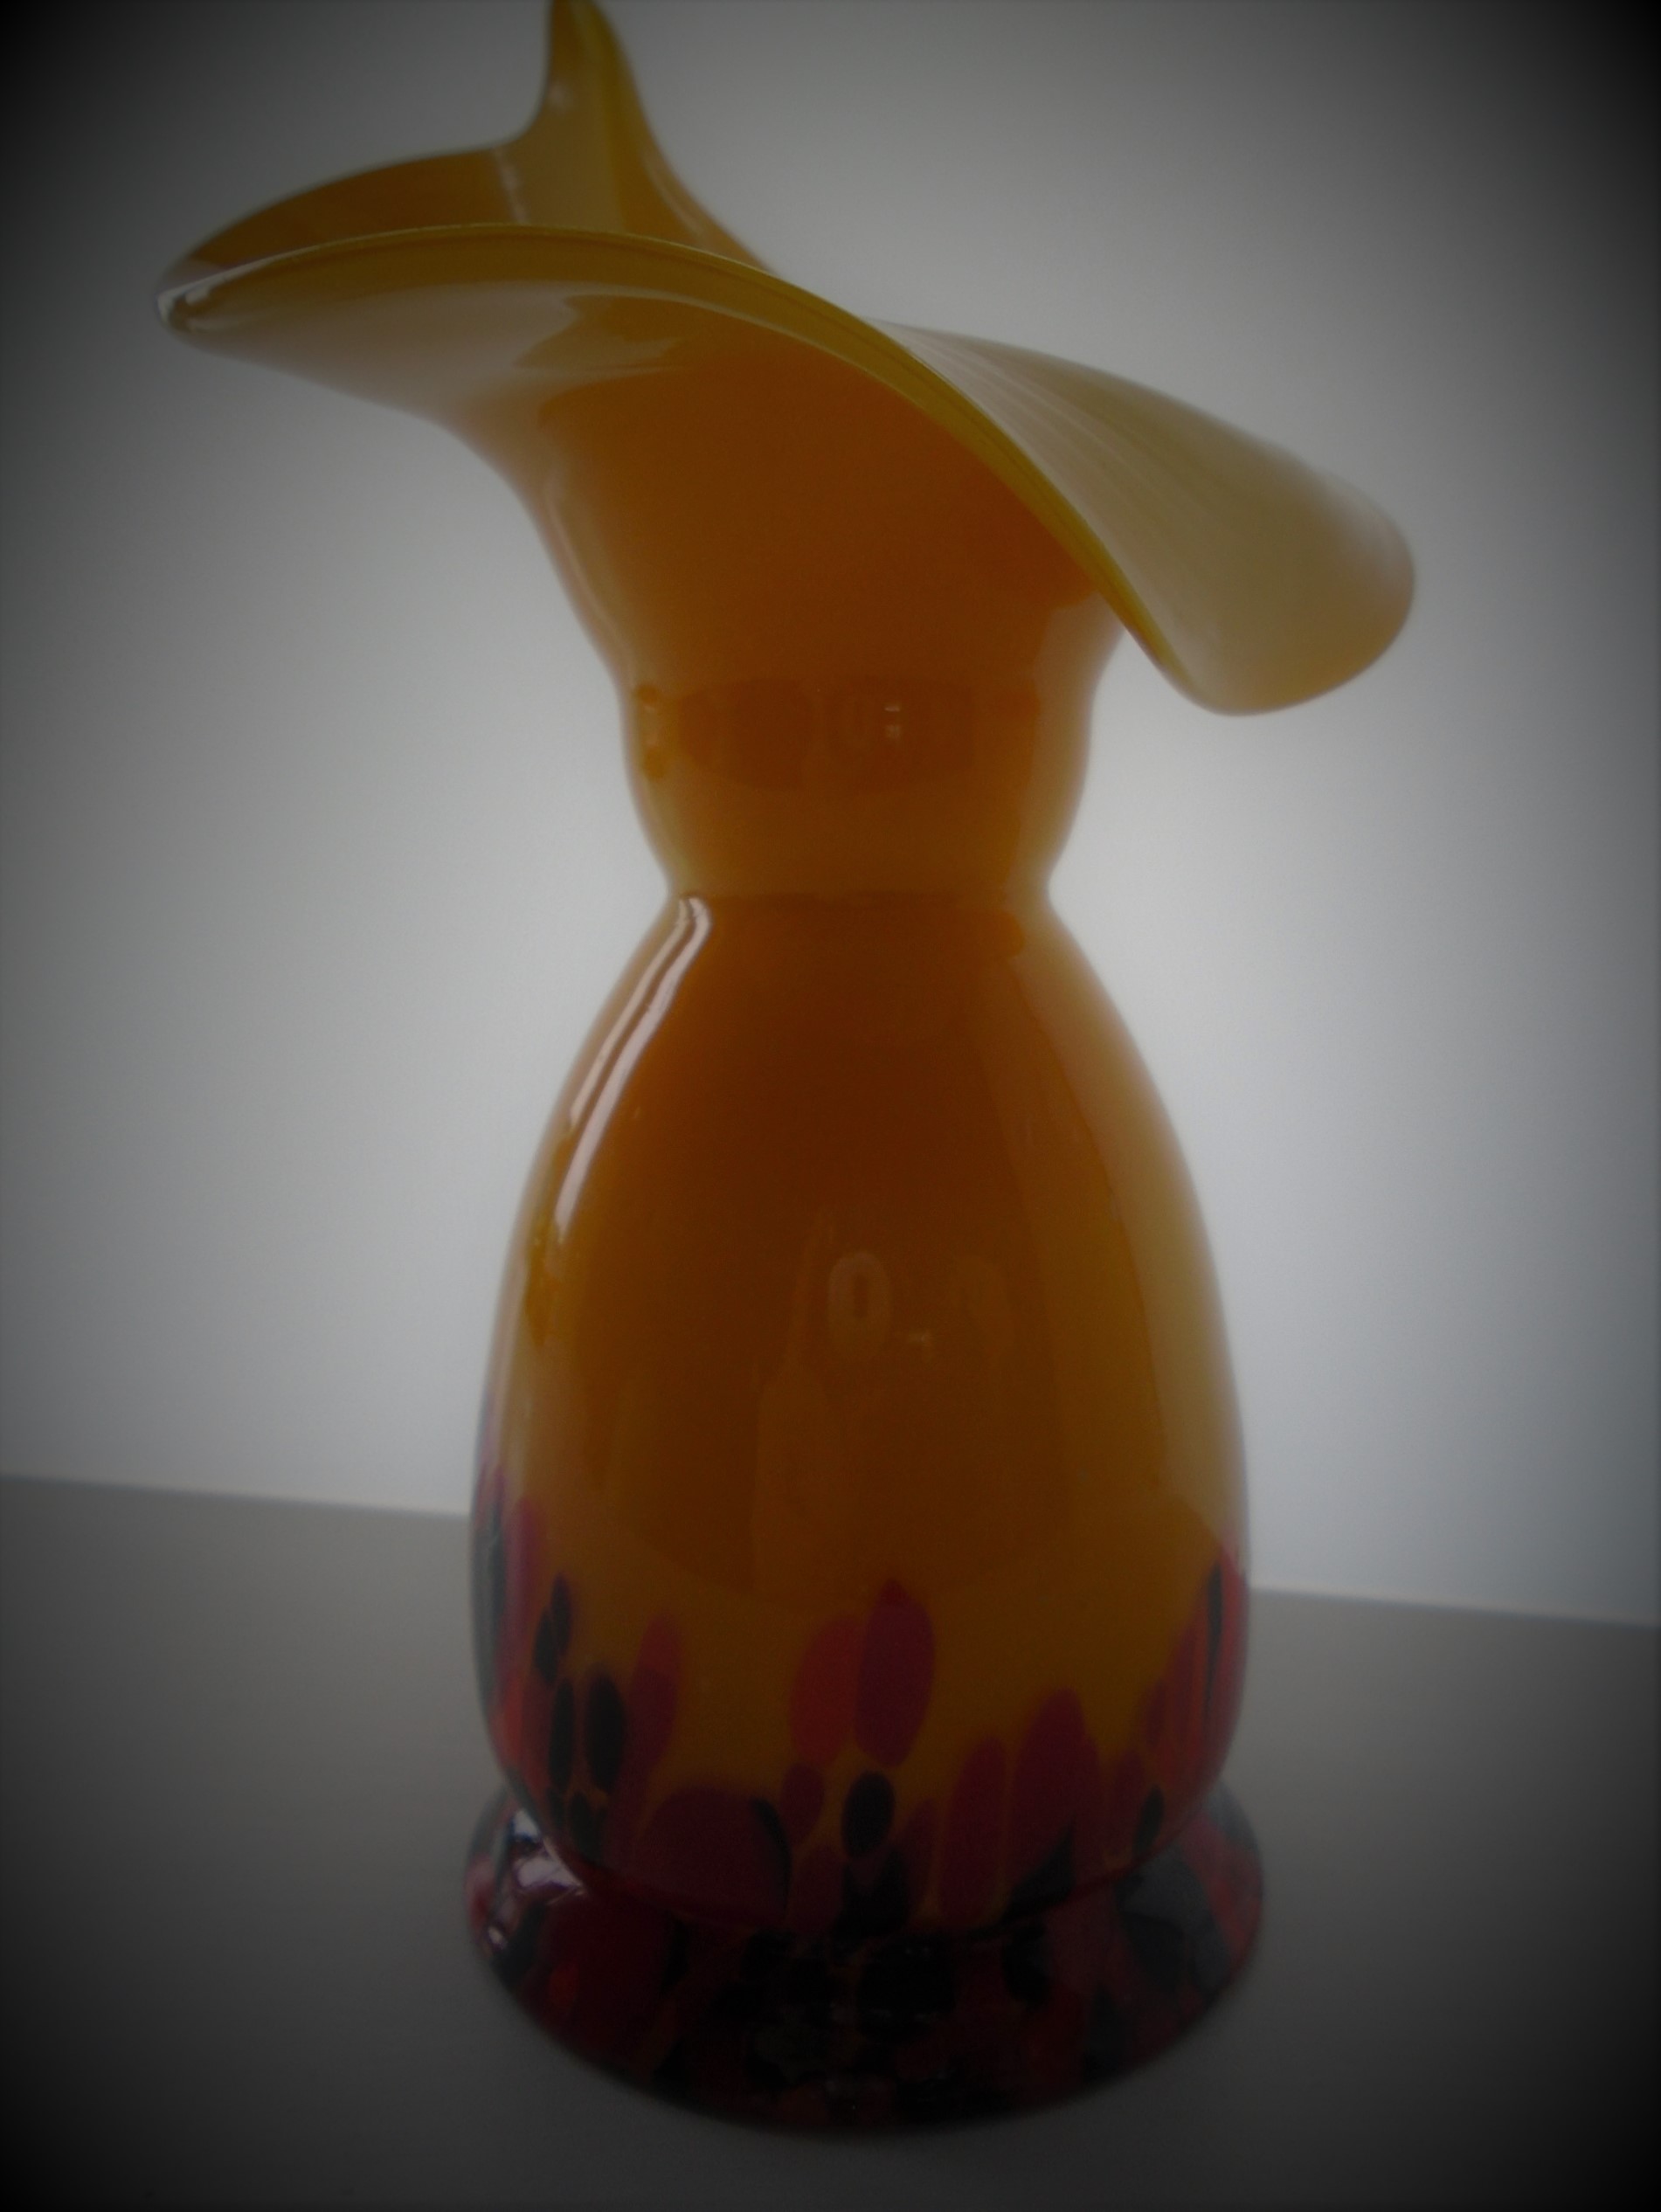  Stunning example of 1960's  CALLA LILY Art Glass VASE.